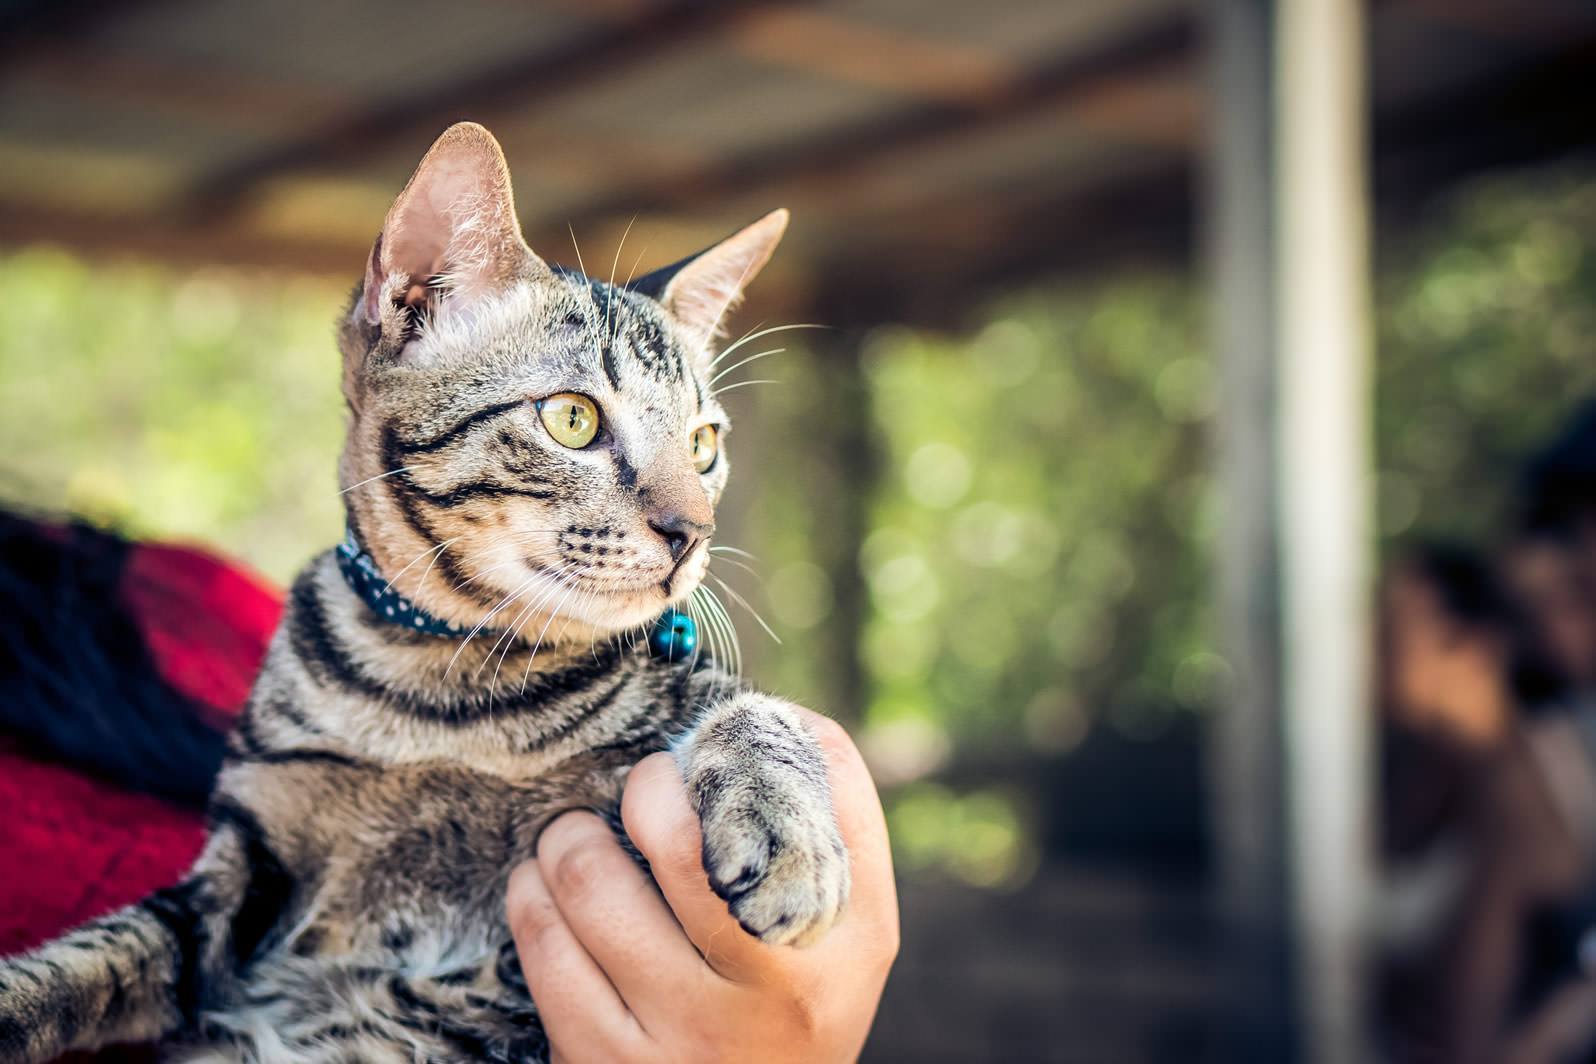 How To Train Your Cat To Sit In 5 Easy Steps #cattraining - Cat training  tricks, Cat training, Cat care